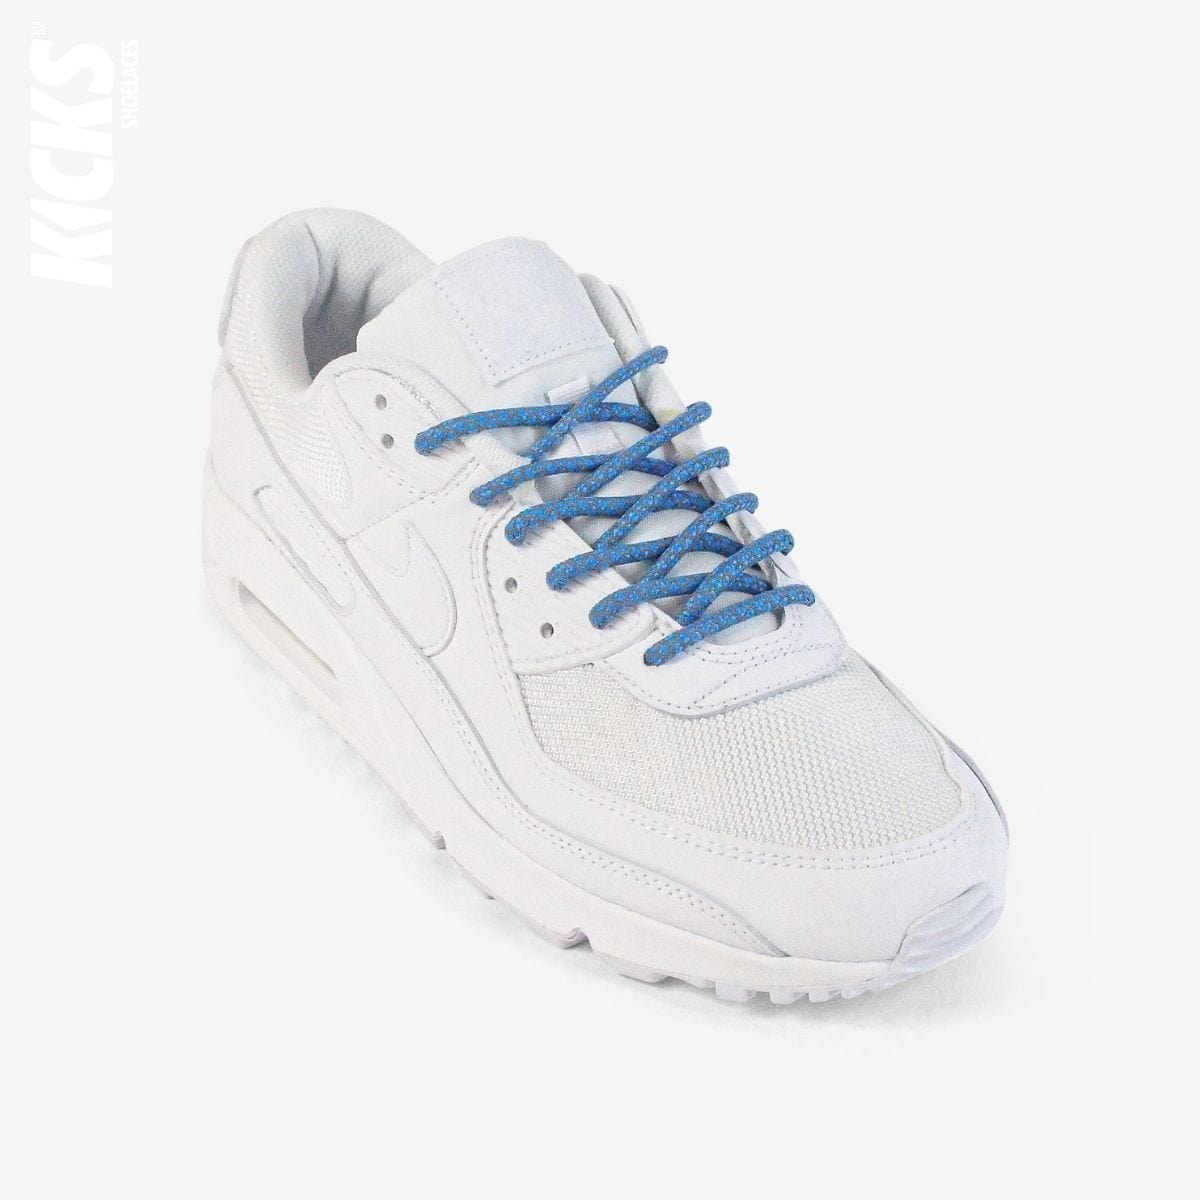 rope-laces-on-white-sneakers-with-kids-sky-blue-shoelaces